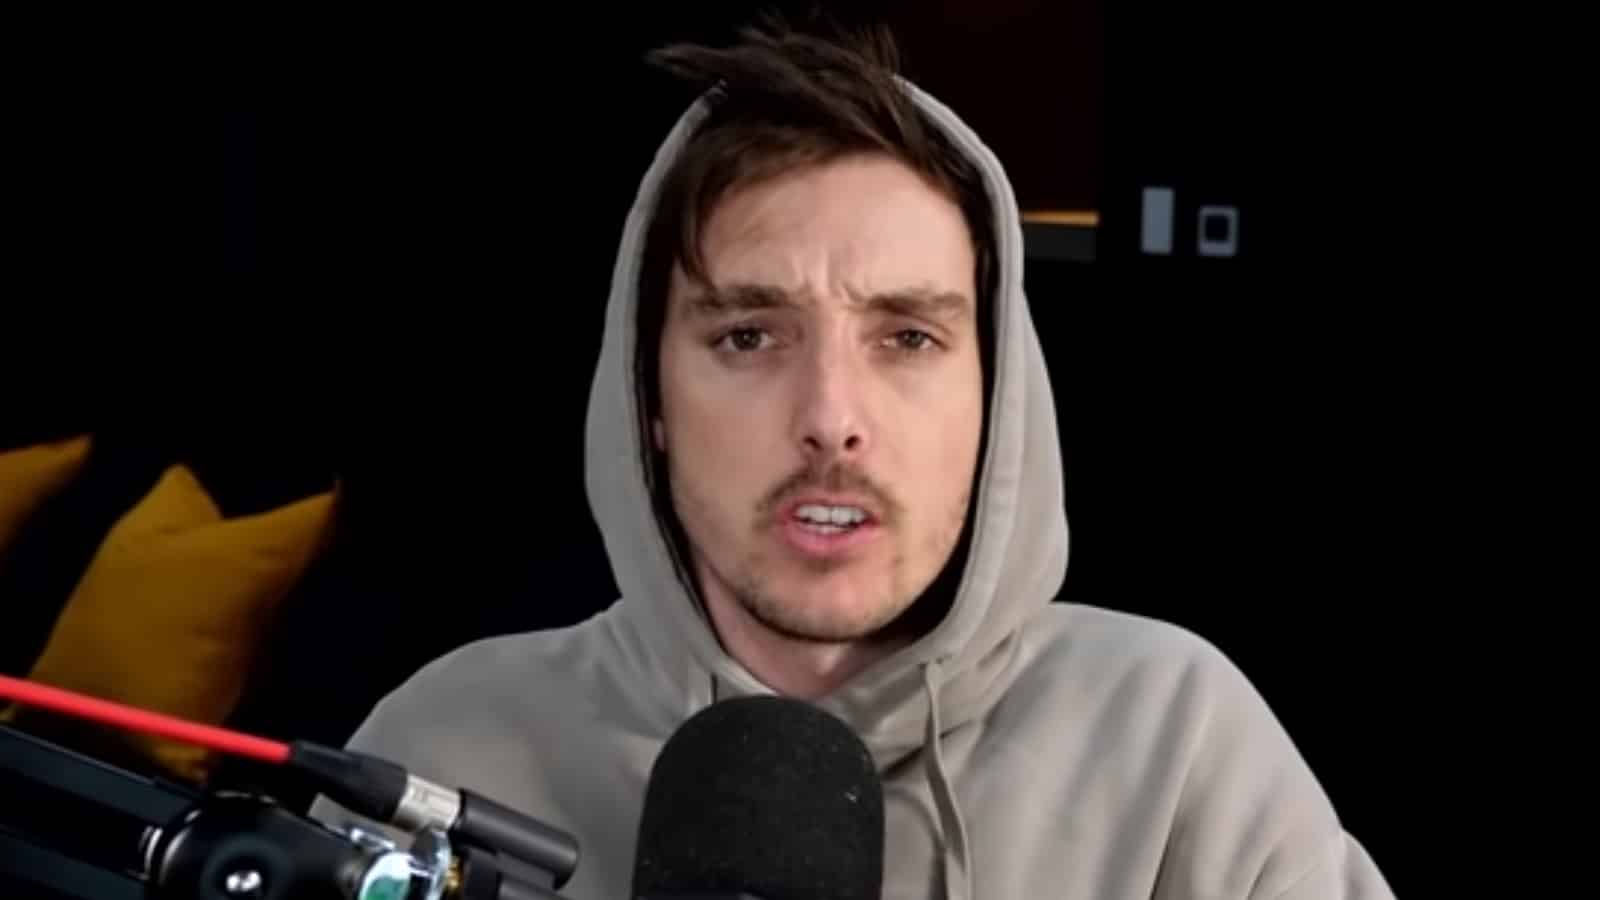 LazarBeam opens up on YouTube struggles: "I can’t remember the last day I felt relaxed"